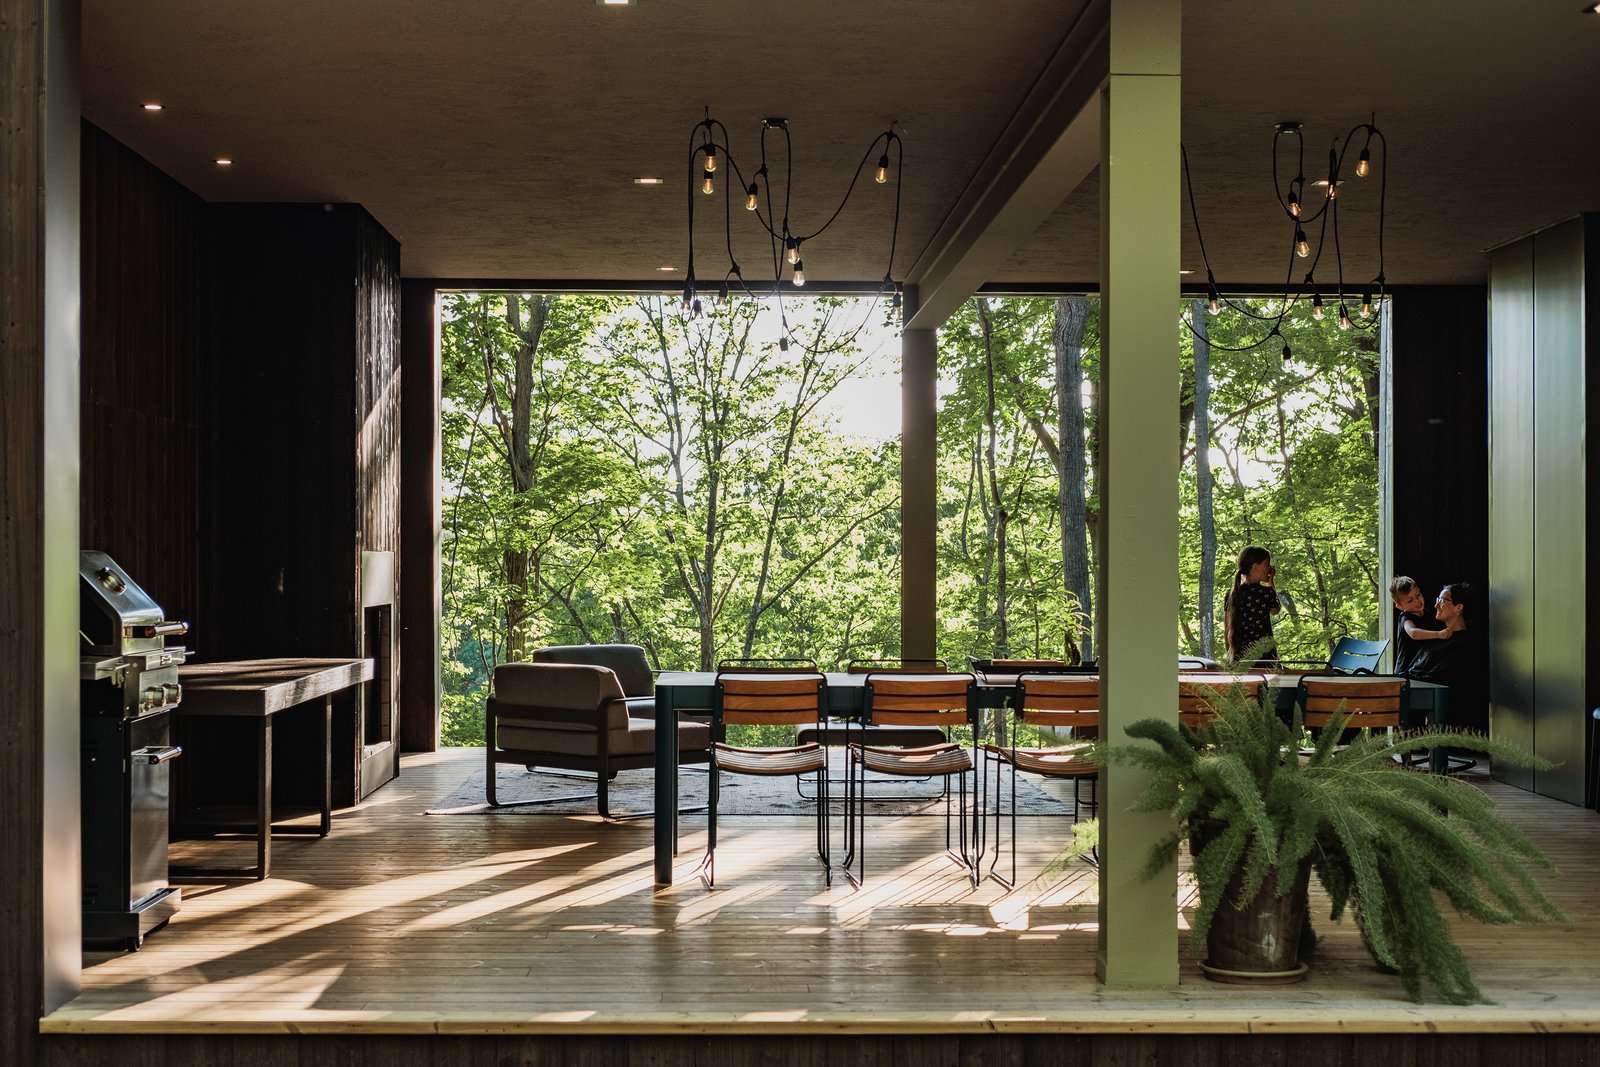 In addition to its sloping, tree-covered lot, what makes the Birch Le Collaboration House so special is the home's large, indoor-outdoor covered porch. The space is an extension of the floor-to-ceiling windows that line the walls of every Hygge Supply home. The Birch Le Collaboration House is also the first Hygge Supply home to be finished in black-stained Thermory pine cladding.